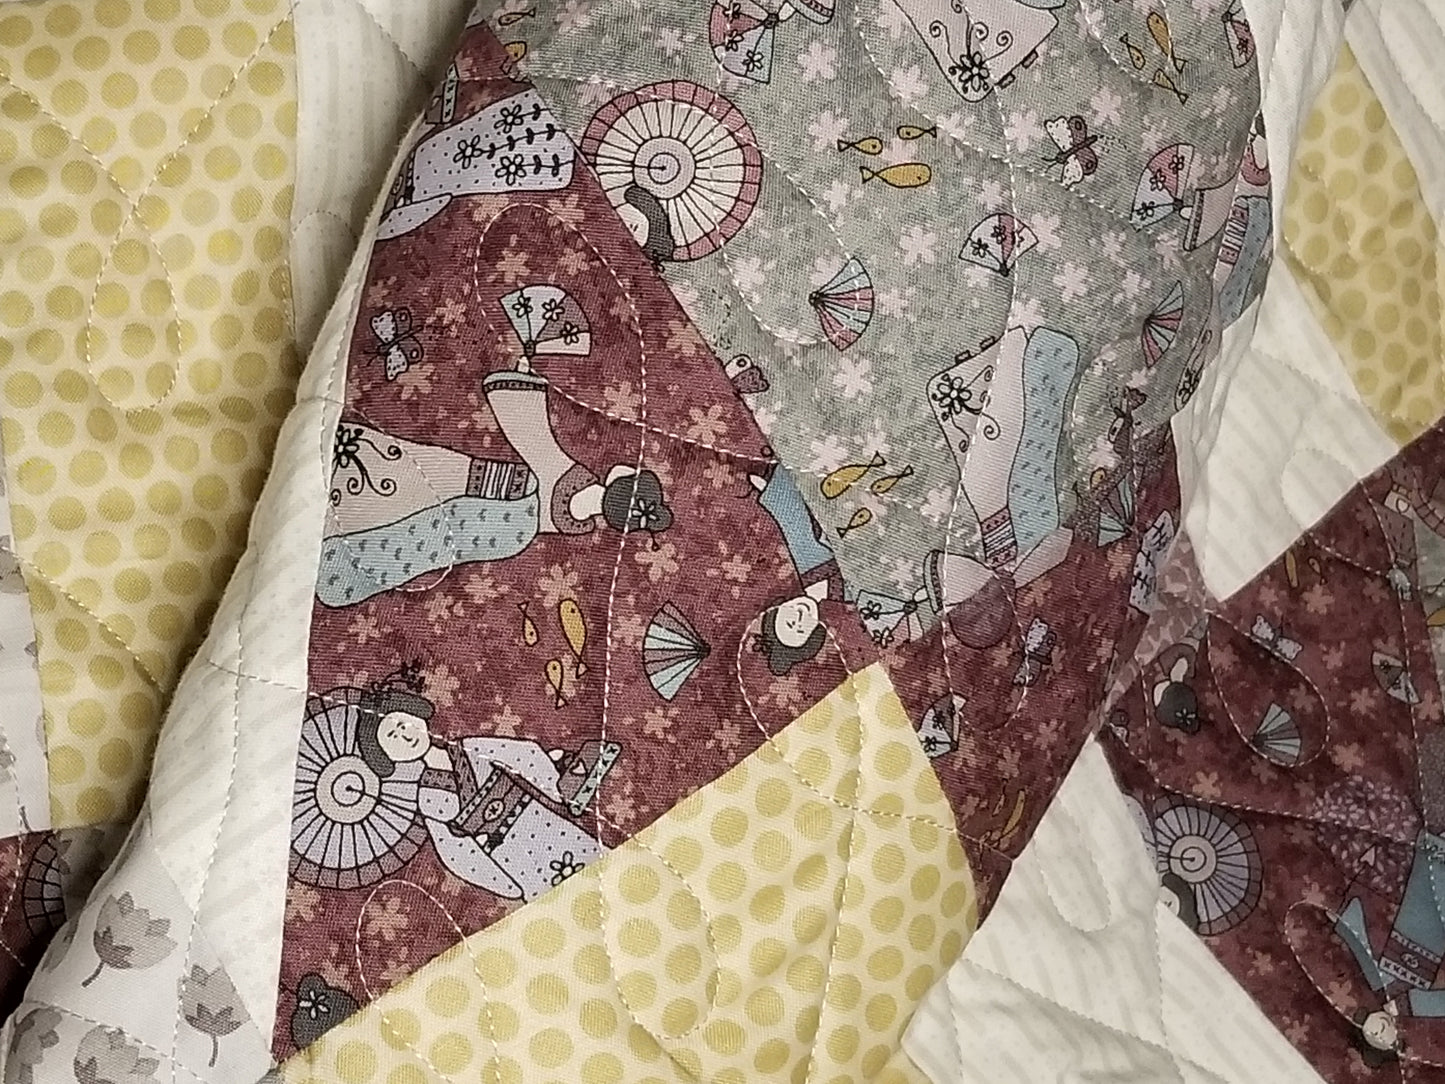 Burgundy, gray and gold baby quilt